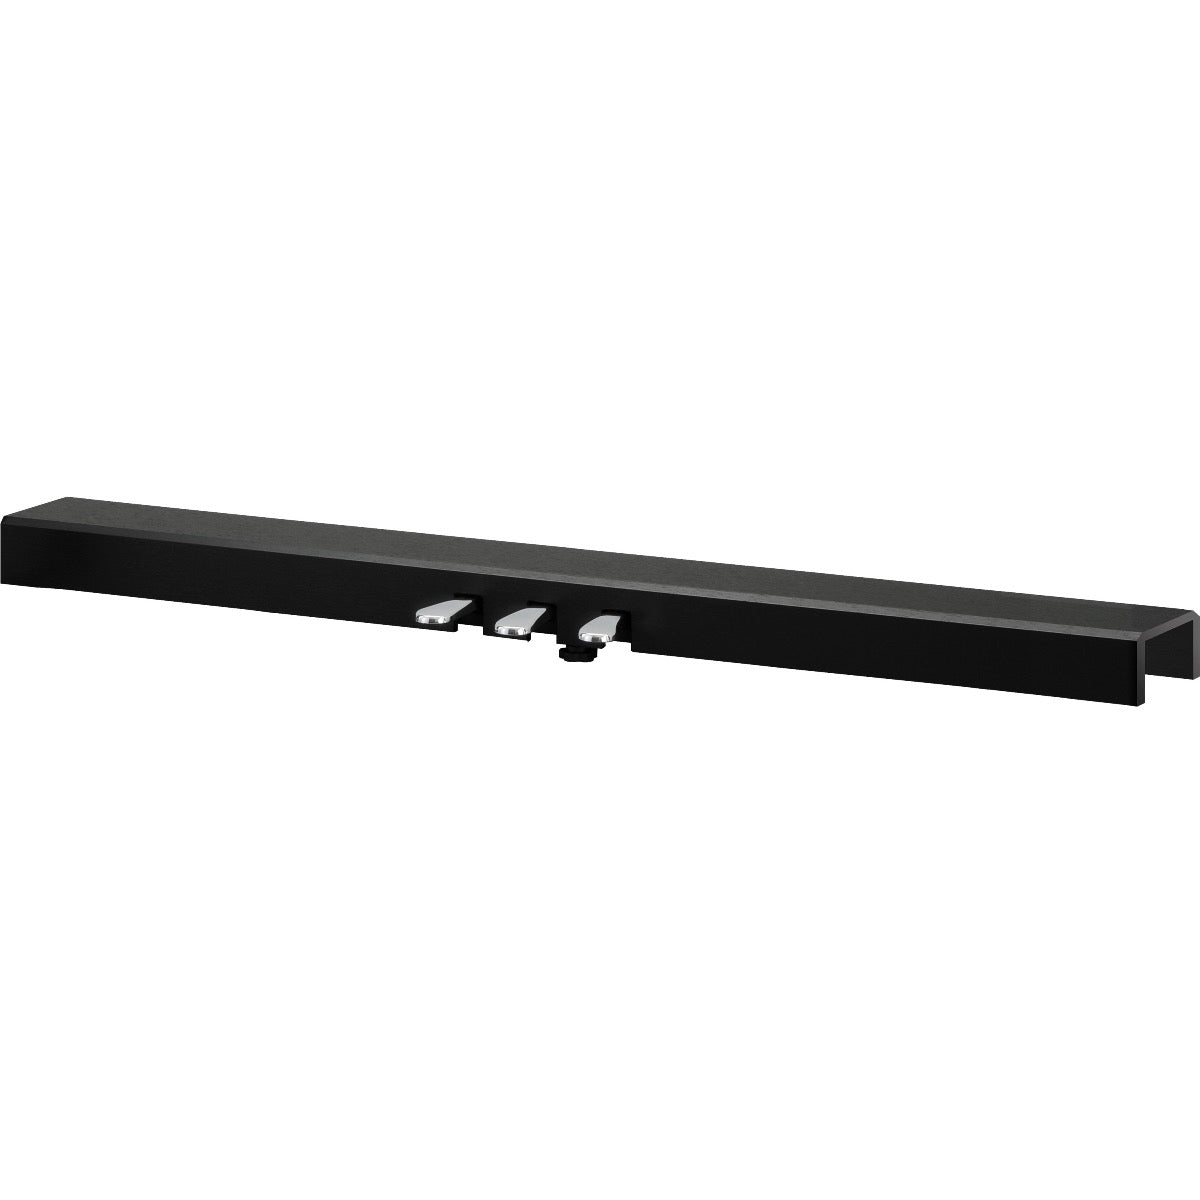 3/4 view of Kawai F-302 Grand Feel Pedal Bar - Black showing front, top and right side